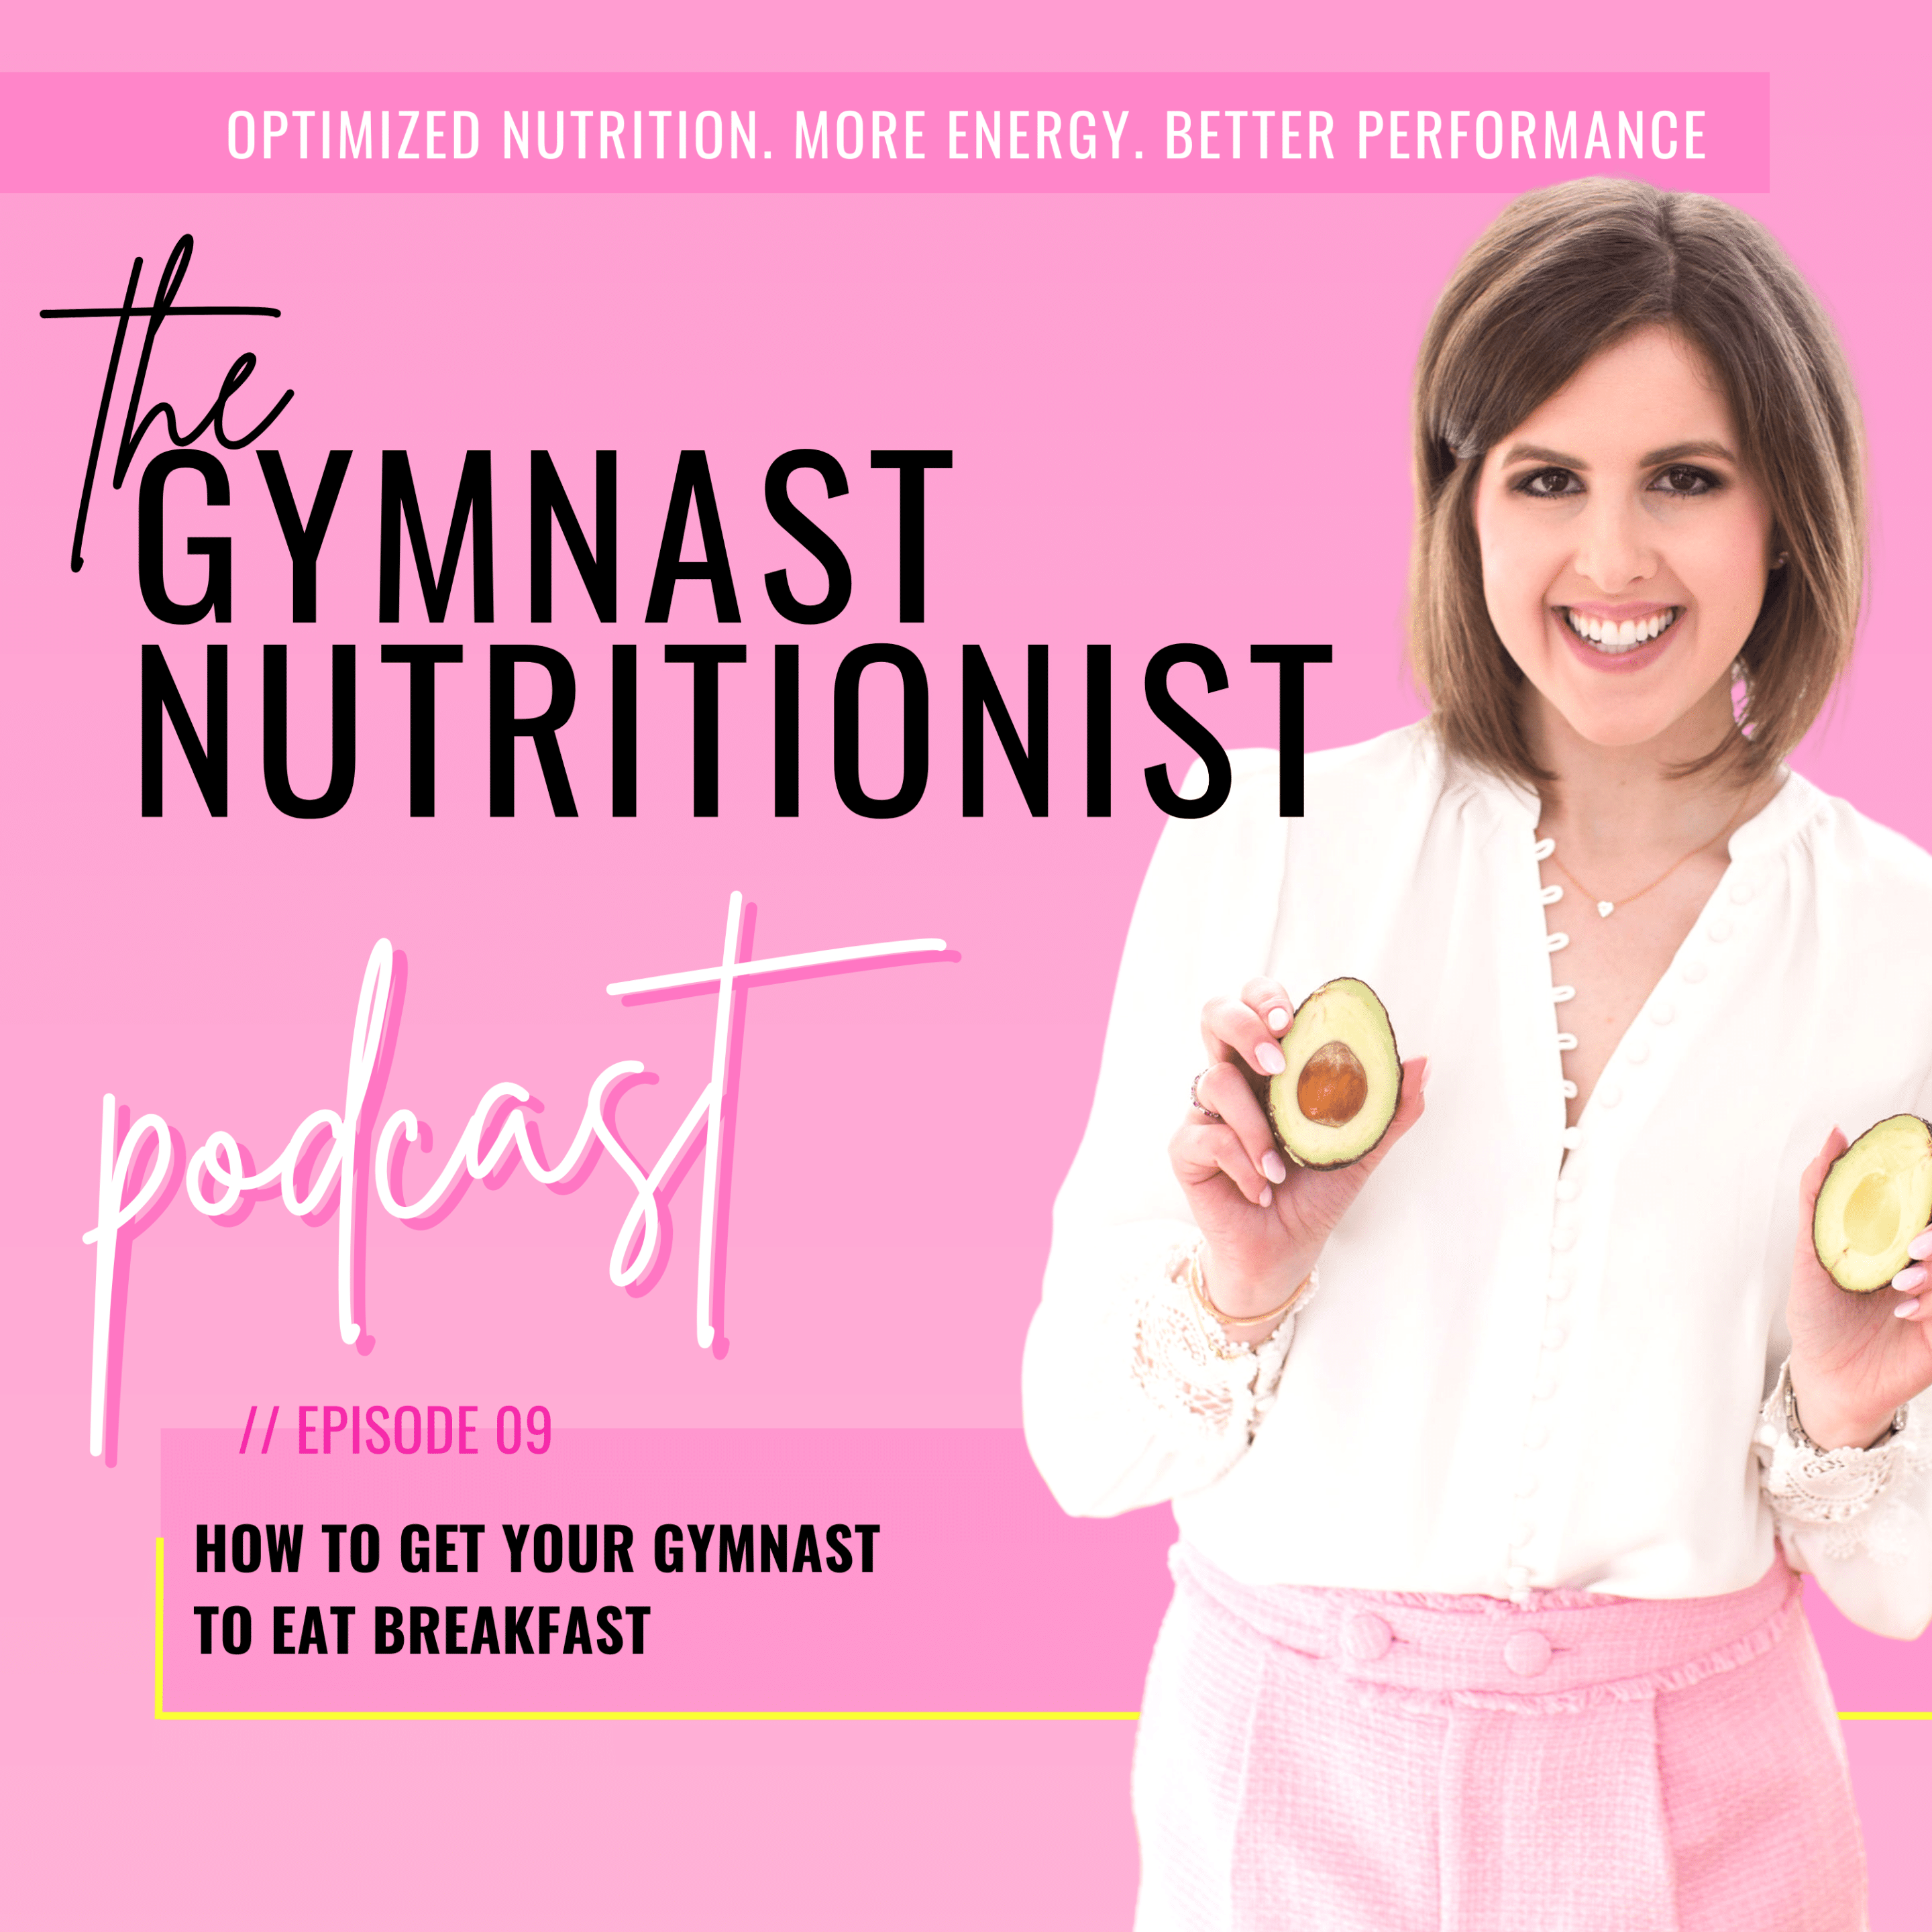 Episode 09: How to Get Your Gymnast to Eat Breakfast